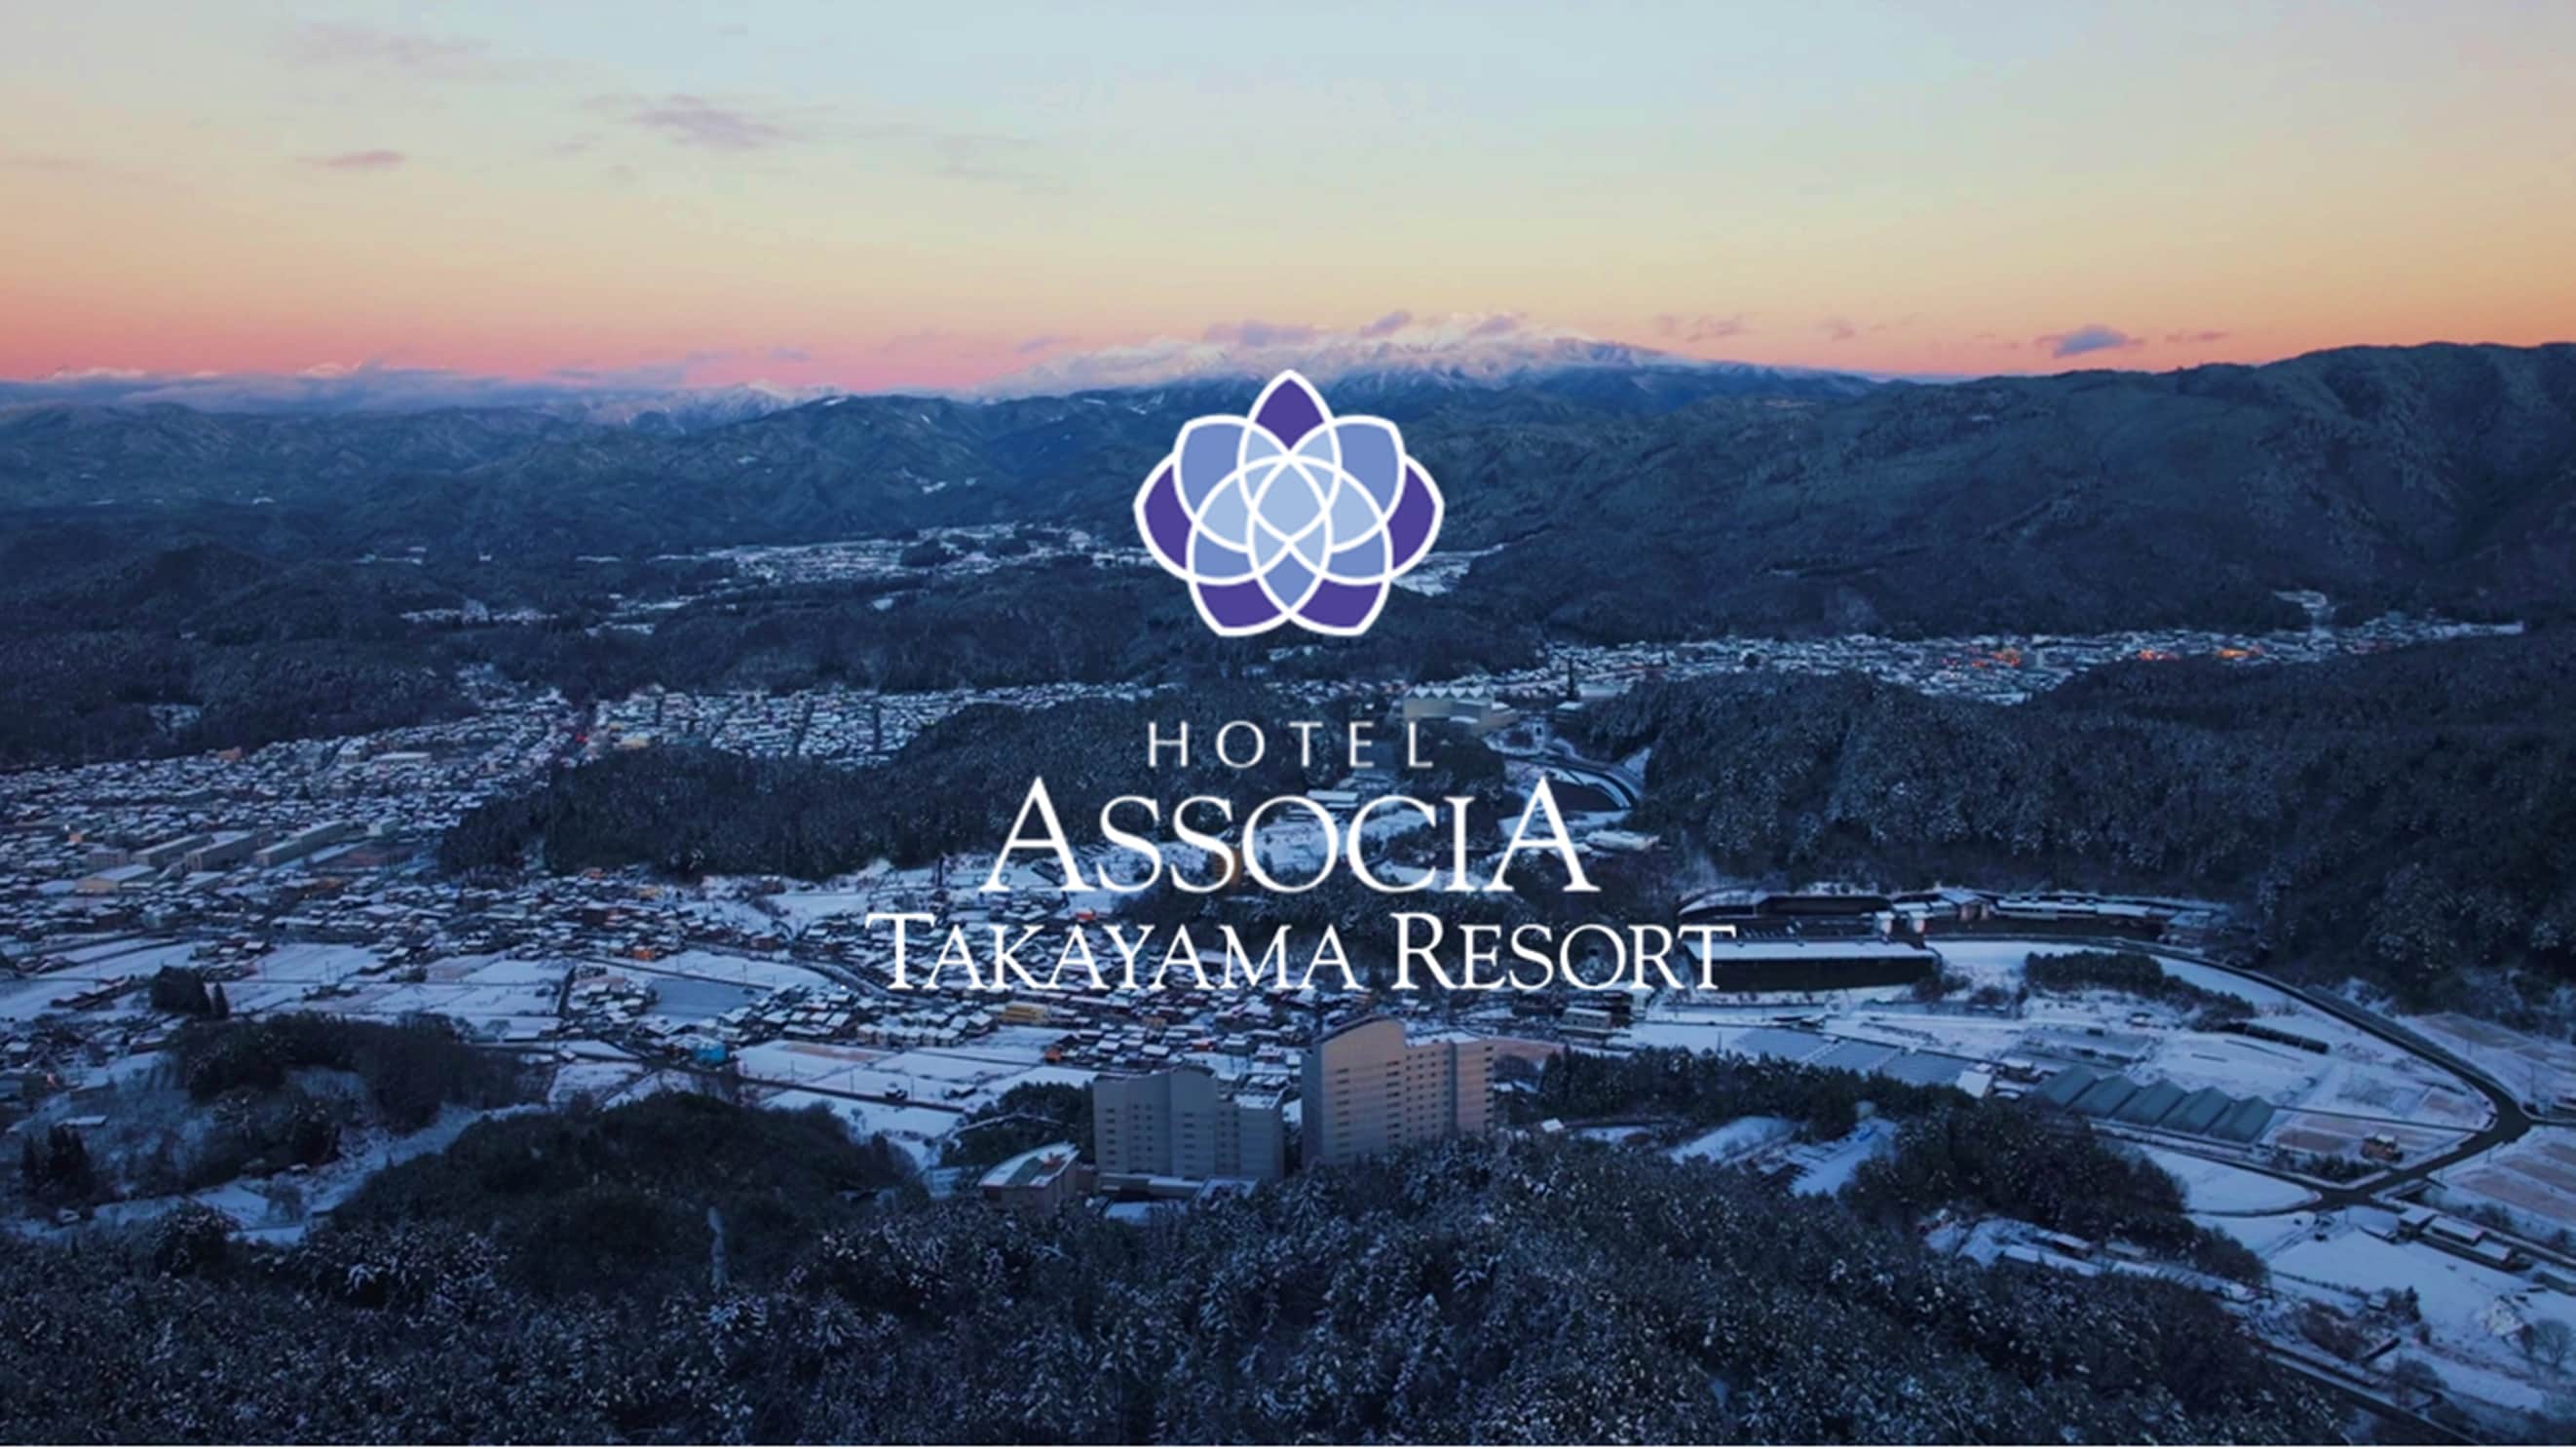 Evening scenery overlooking the Northern Alps at Hotel Associa Takayama Resort in winter